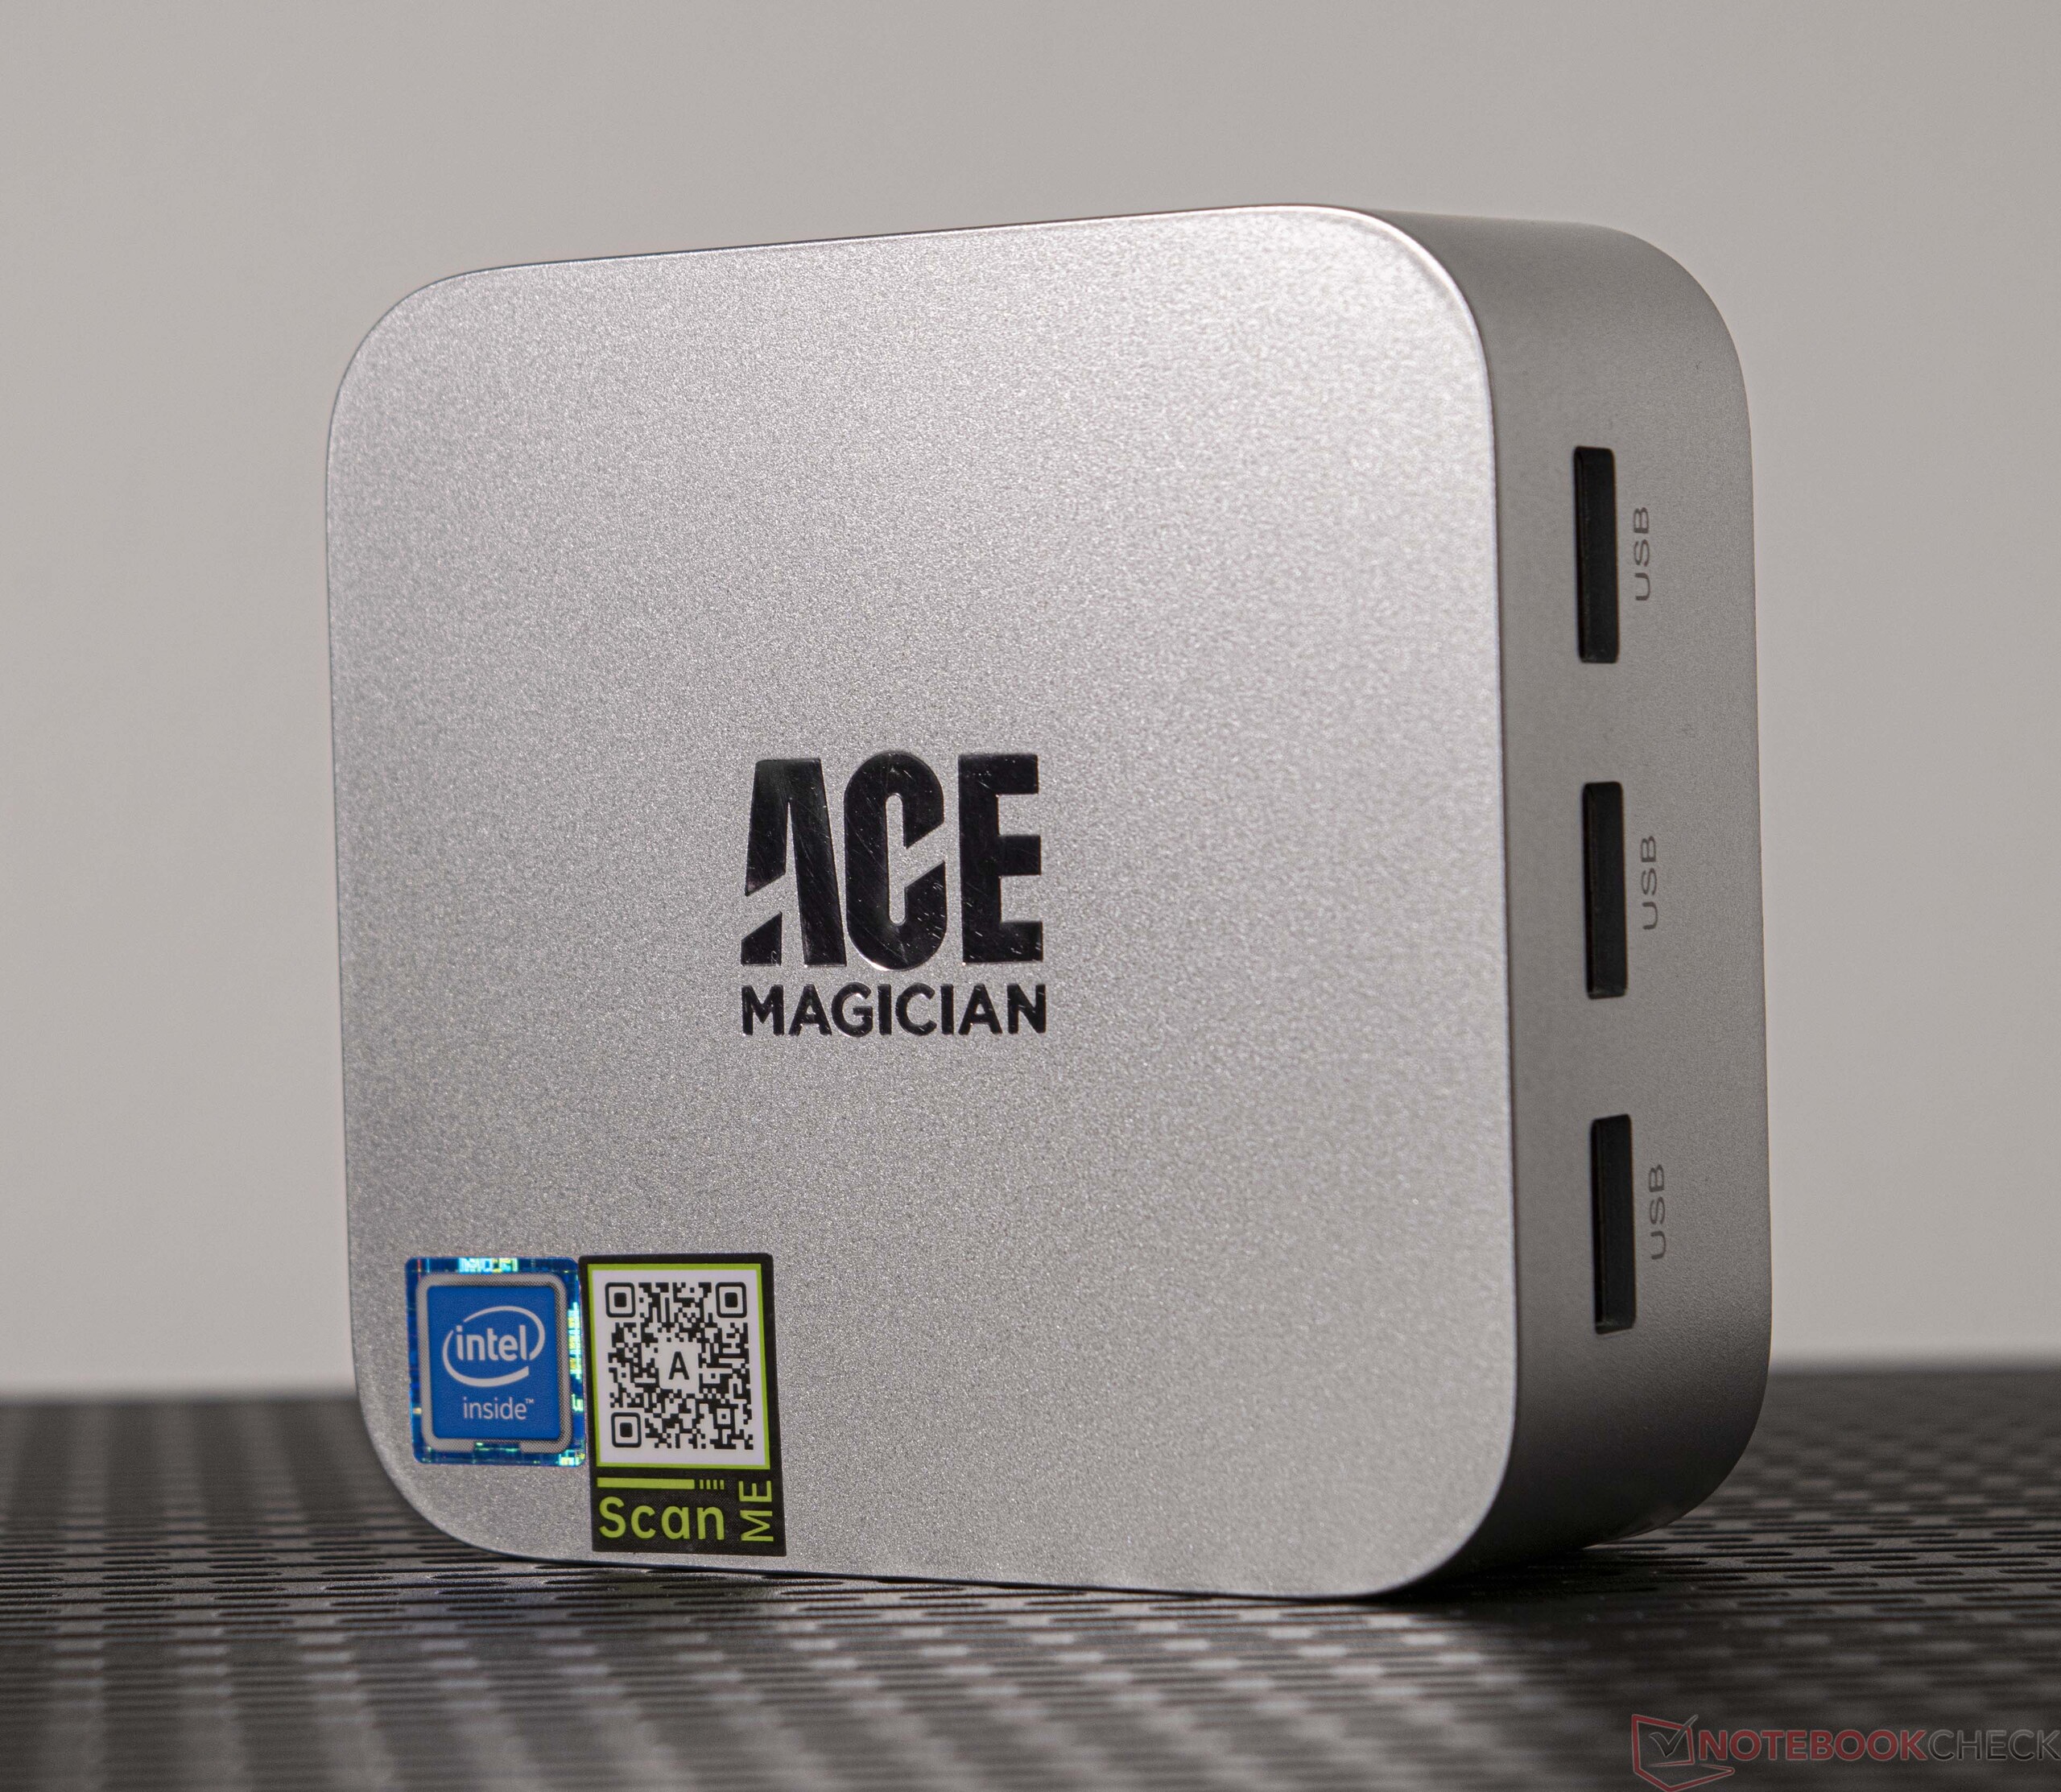 Ace Magician T8Pro review: Budget mini PC for office use -   Reviews